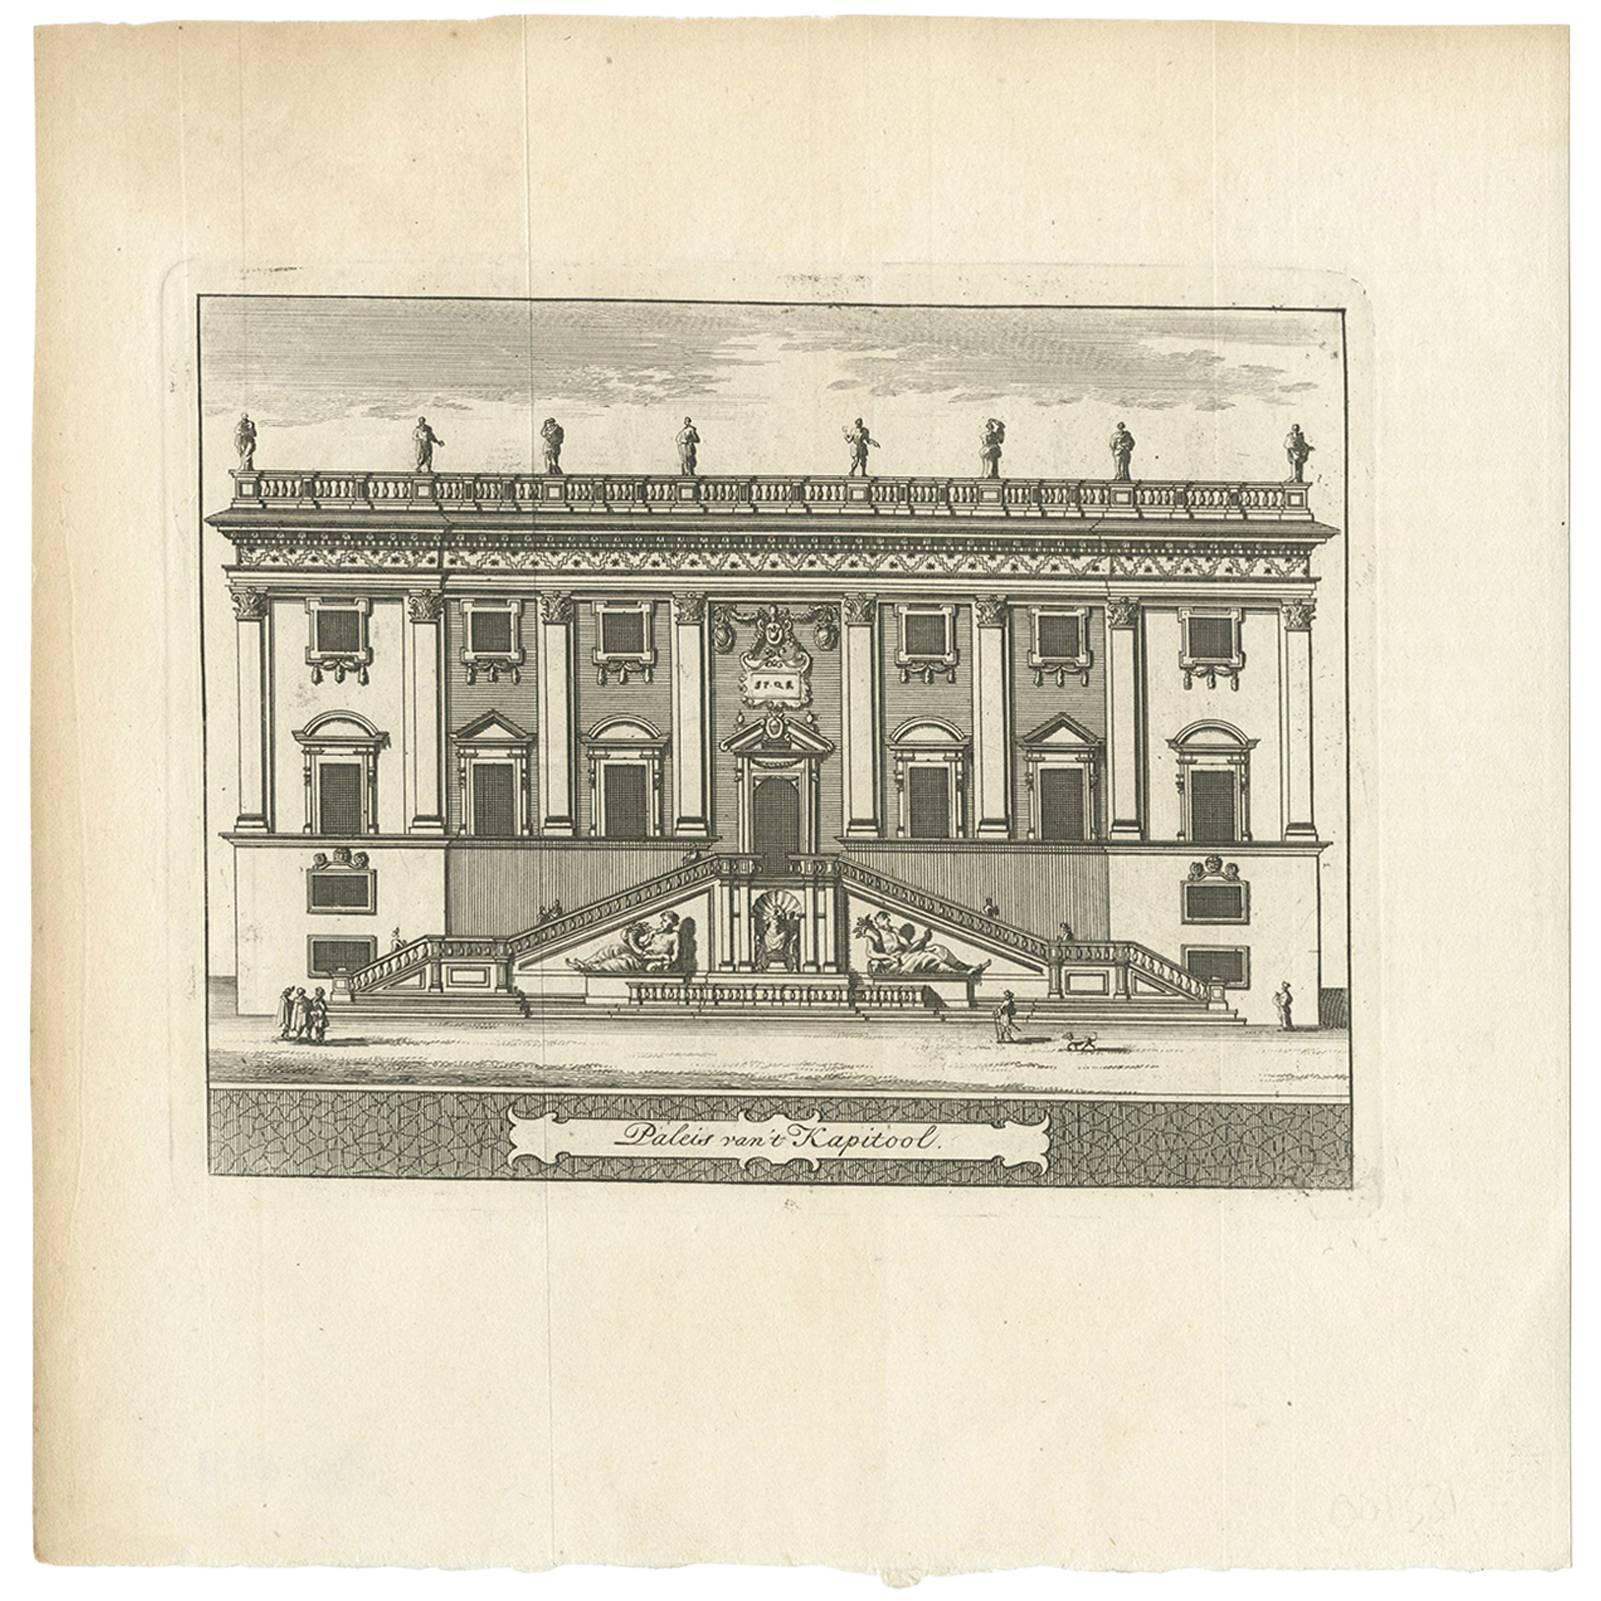 Antique Print of Palazzo Nuovo, Rome by M. de Bruyn, 1779